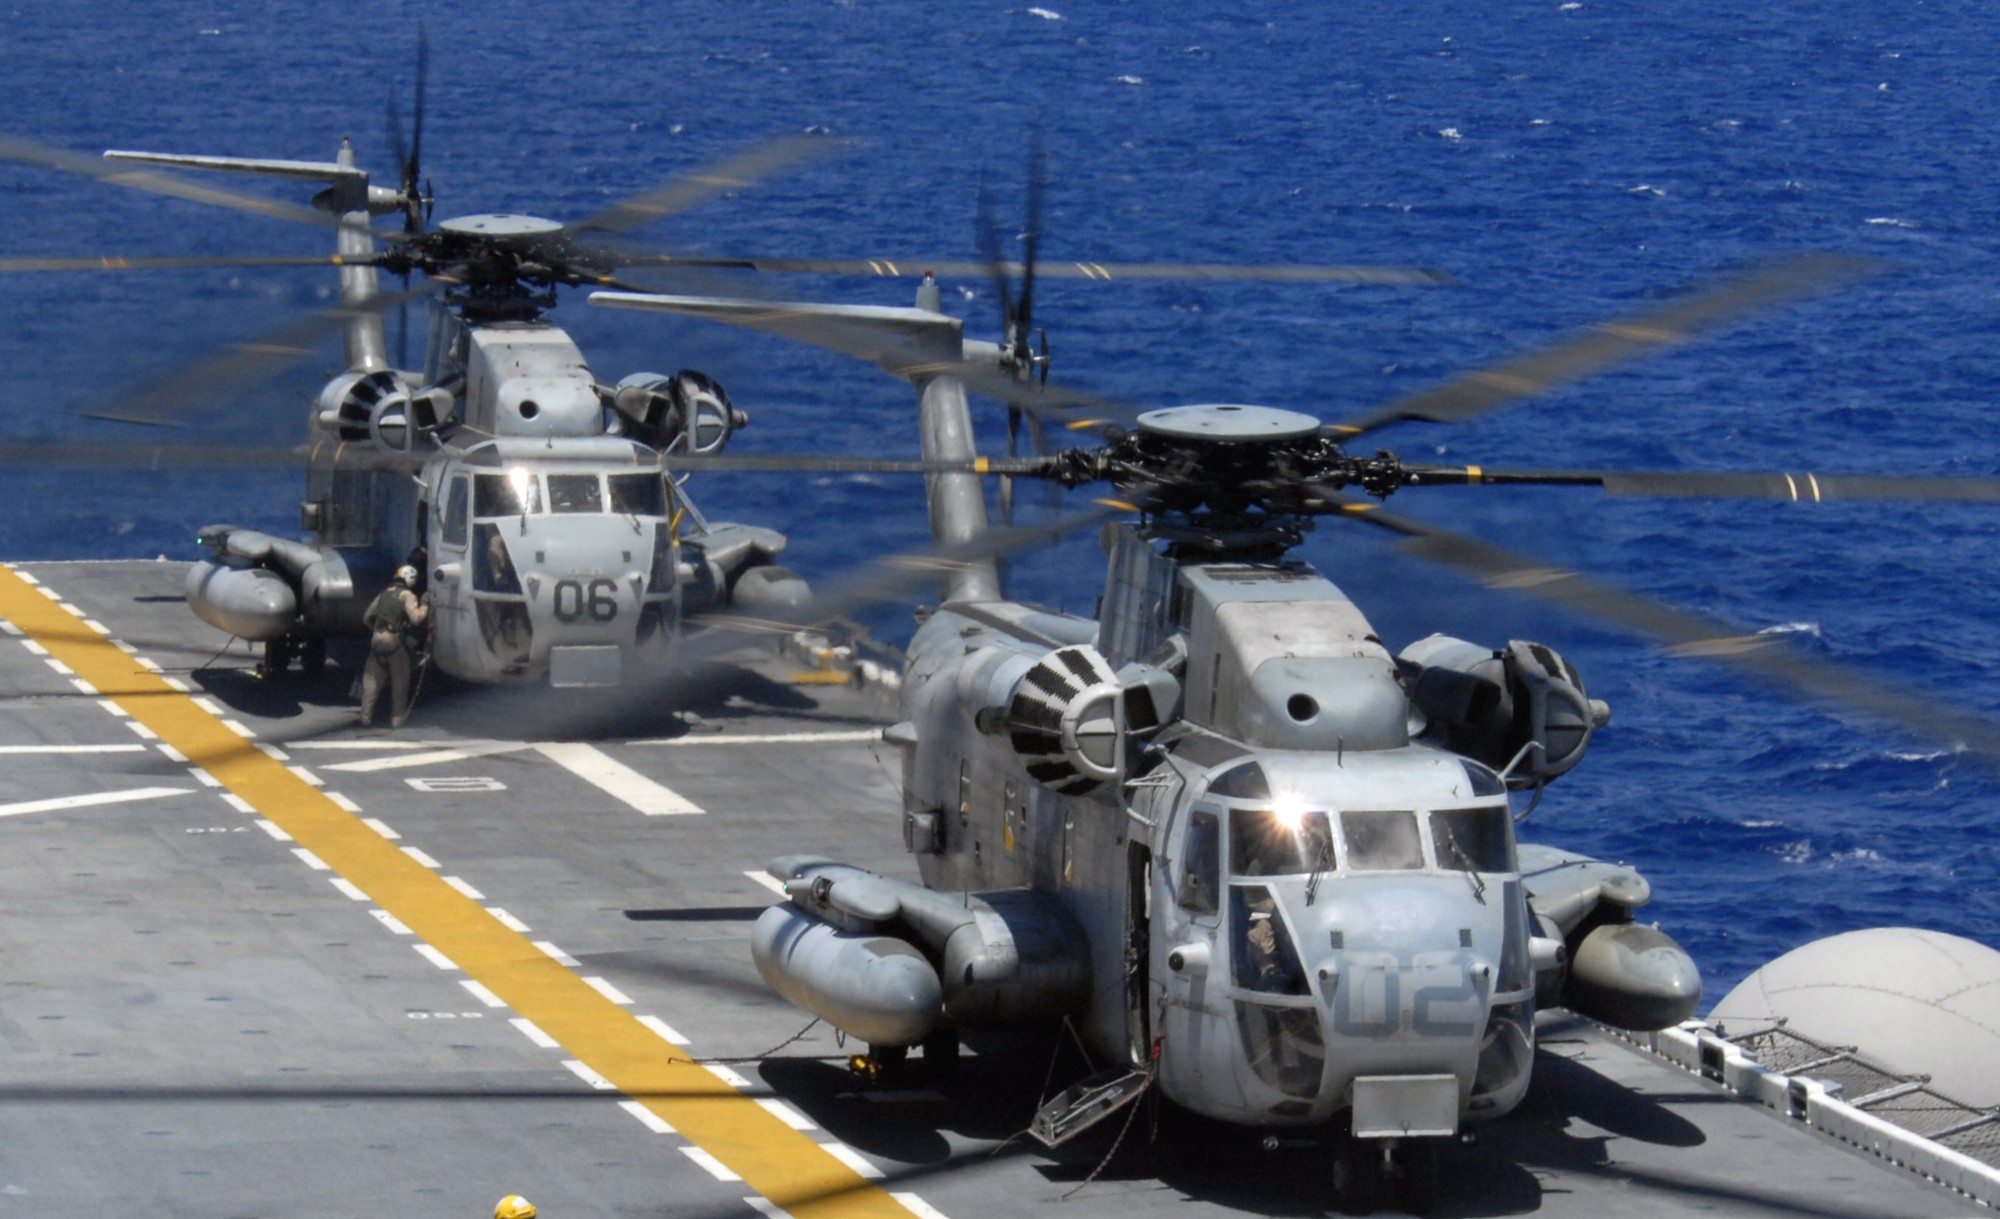 hmh-362 ugly angels marine heavy helicopter squadron usmc sikorsky ch-53d sea stallion 08 uss bonhomme richard lhd-6